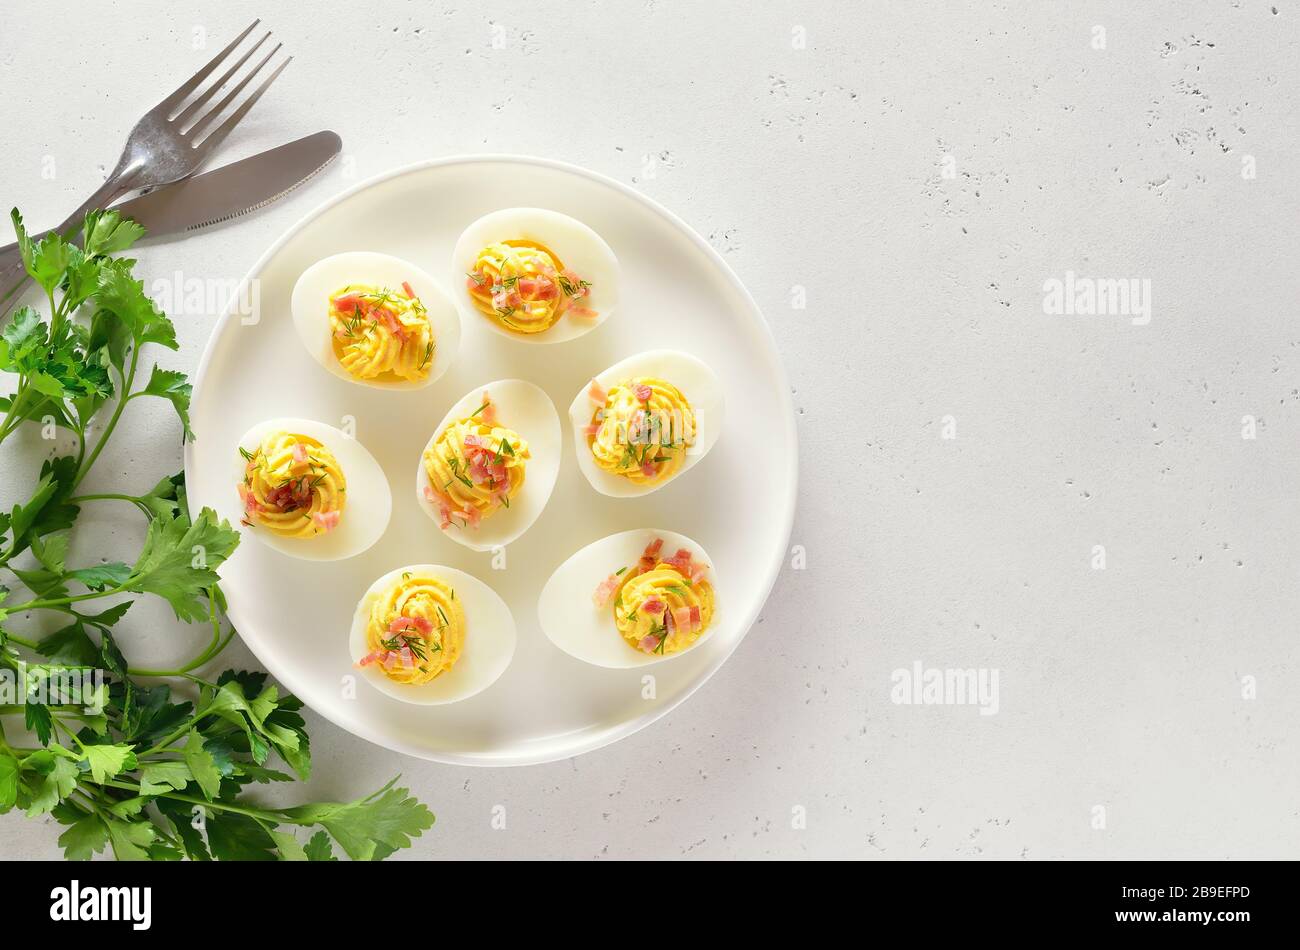 Stuffed eggs with egg yolk, bacon, mustard on plate over light stone background with free text space. Healthy diet food for breakfast. Top view, flat Stock Photo